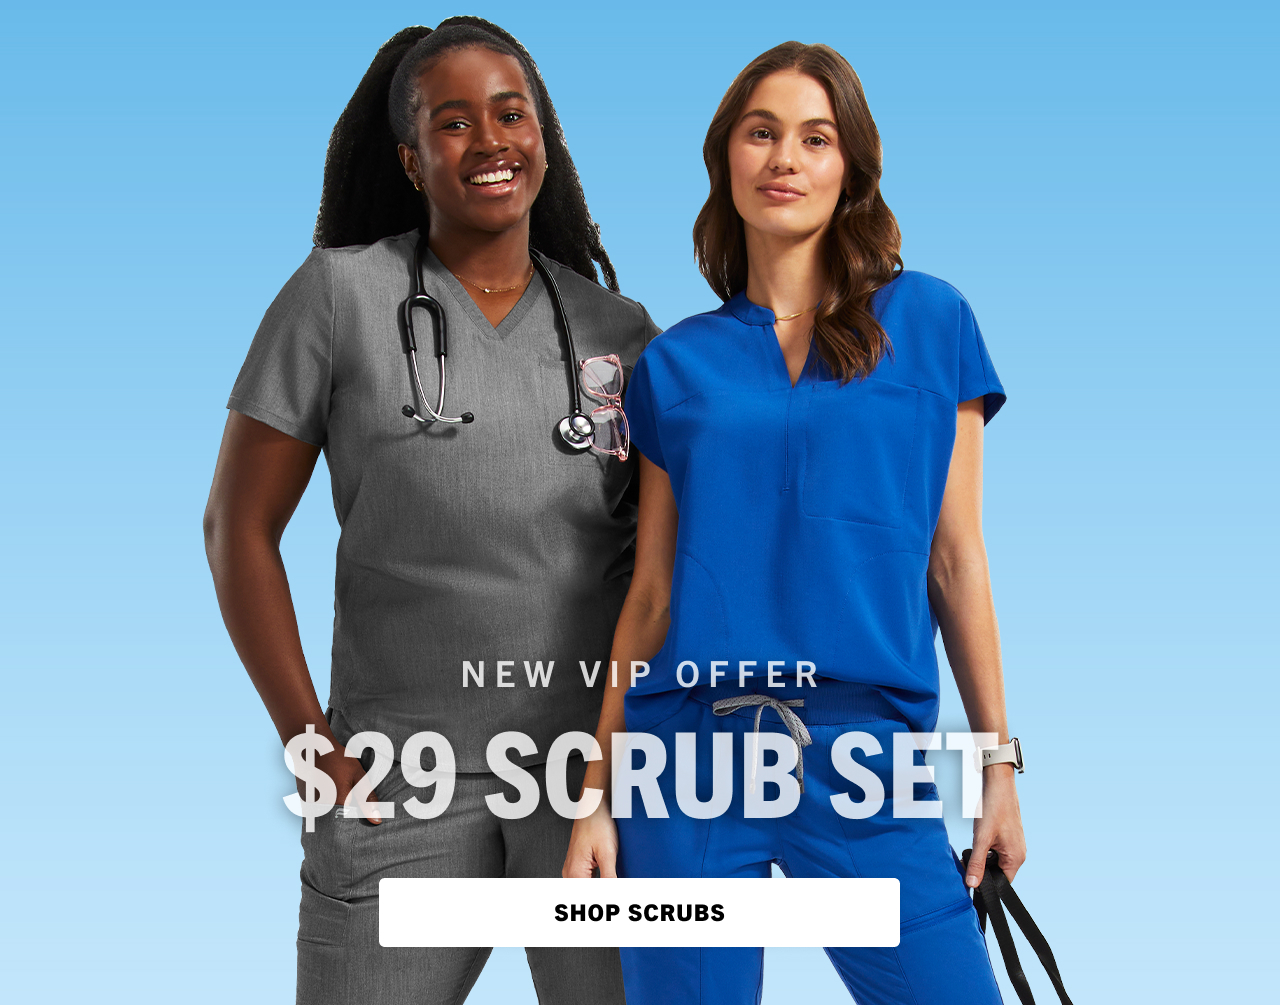 Shop our sister brands and get 60% off Yitty or $29 scrub sets when you join as a new VIP.